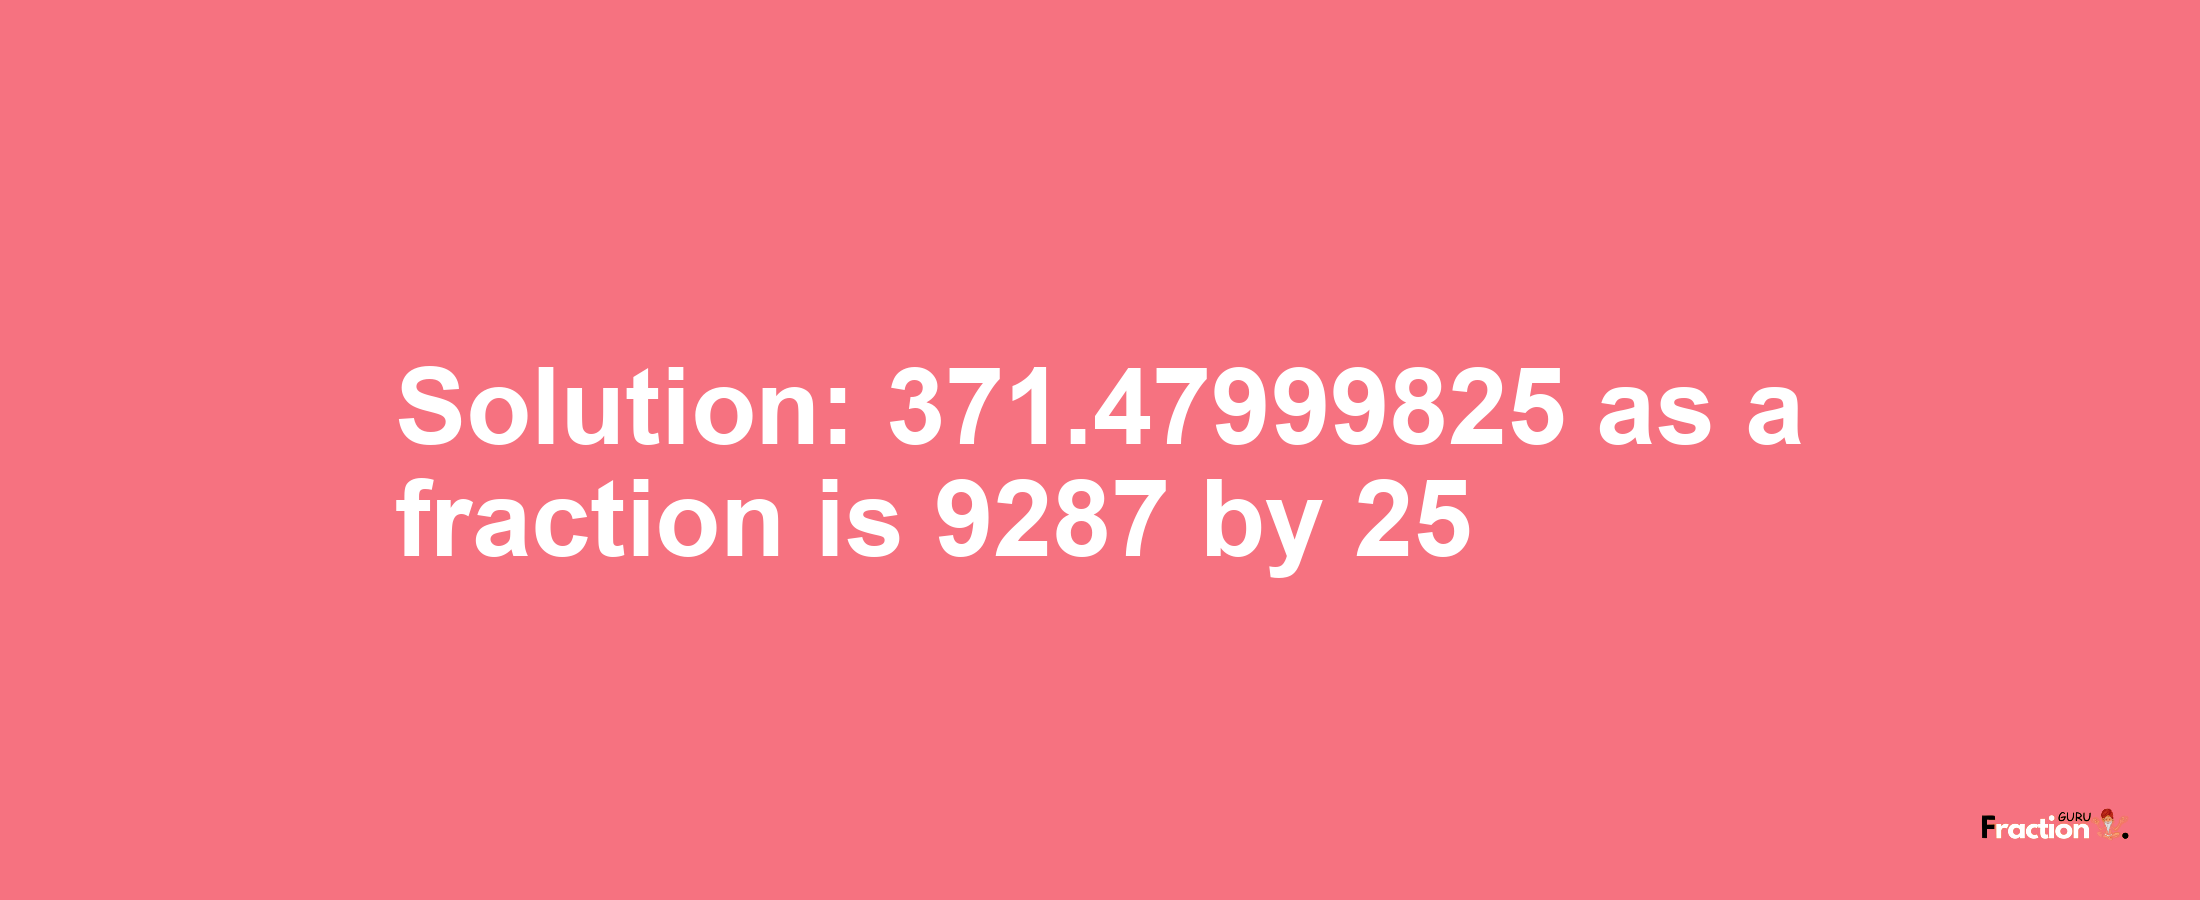 Solution:371.47999825 as a fraction is 9287/25